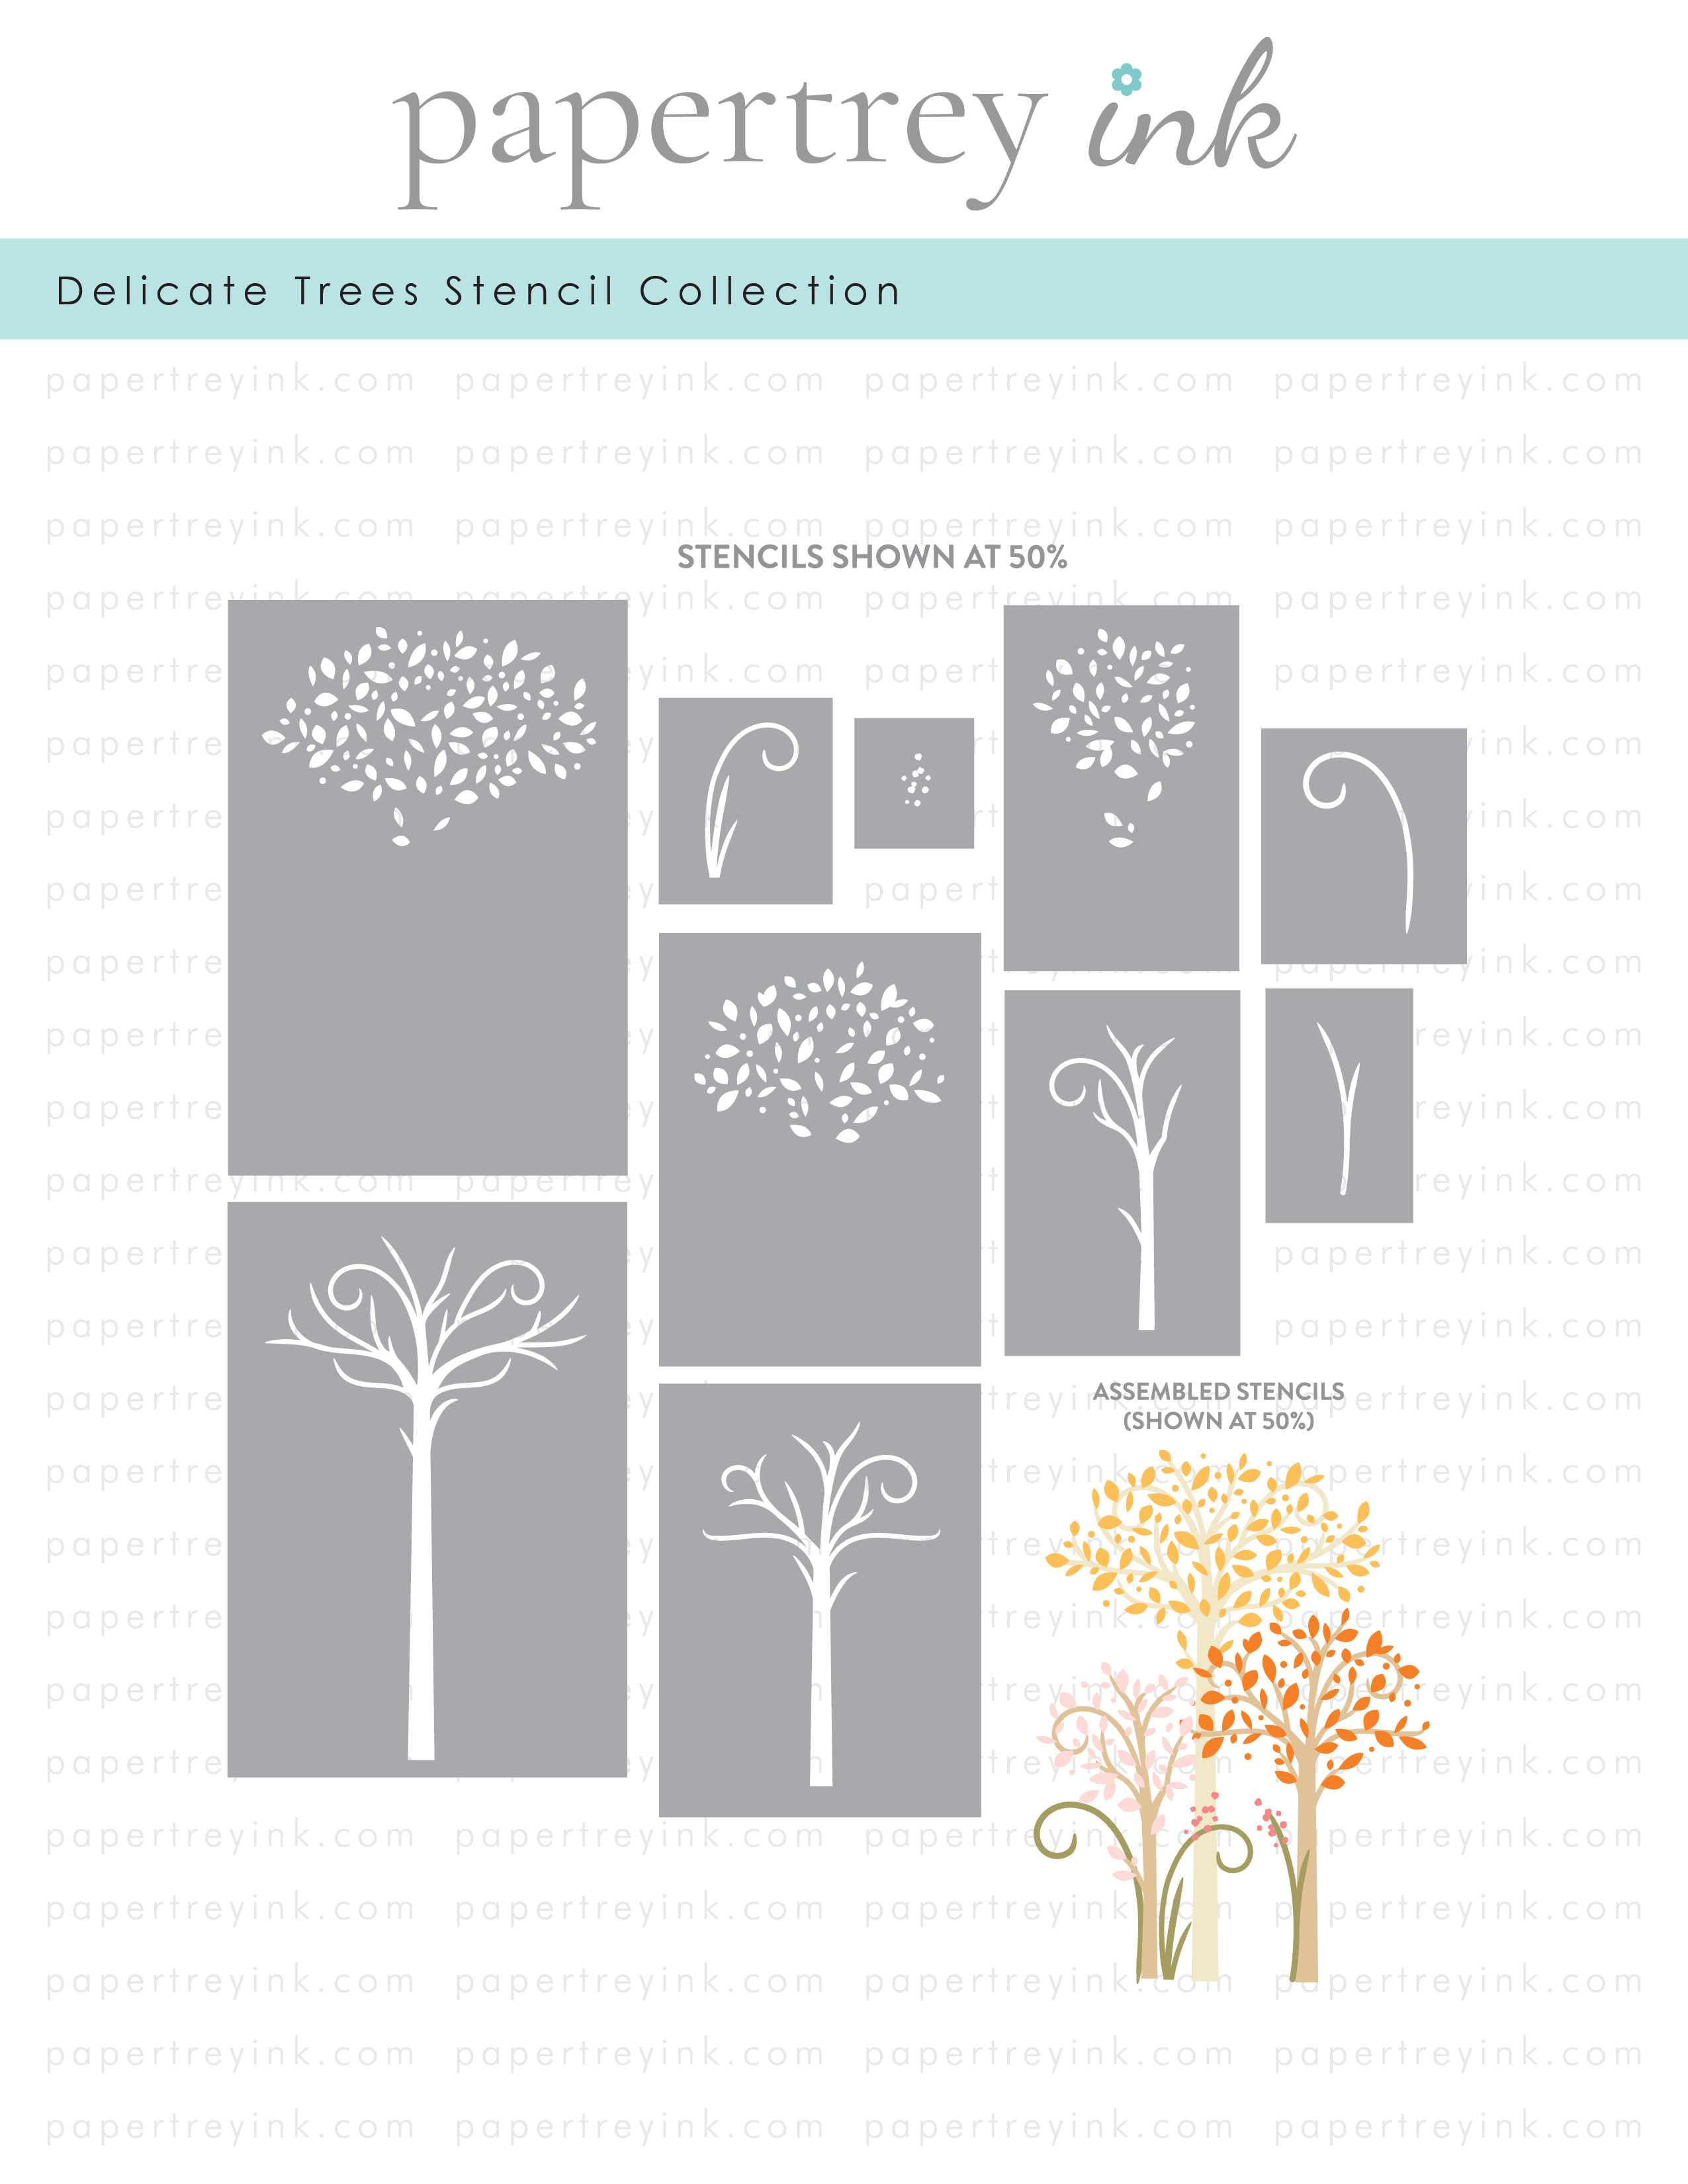 Papertrey Ink - Delicate Trees Stencil Collection (set of 10)